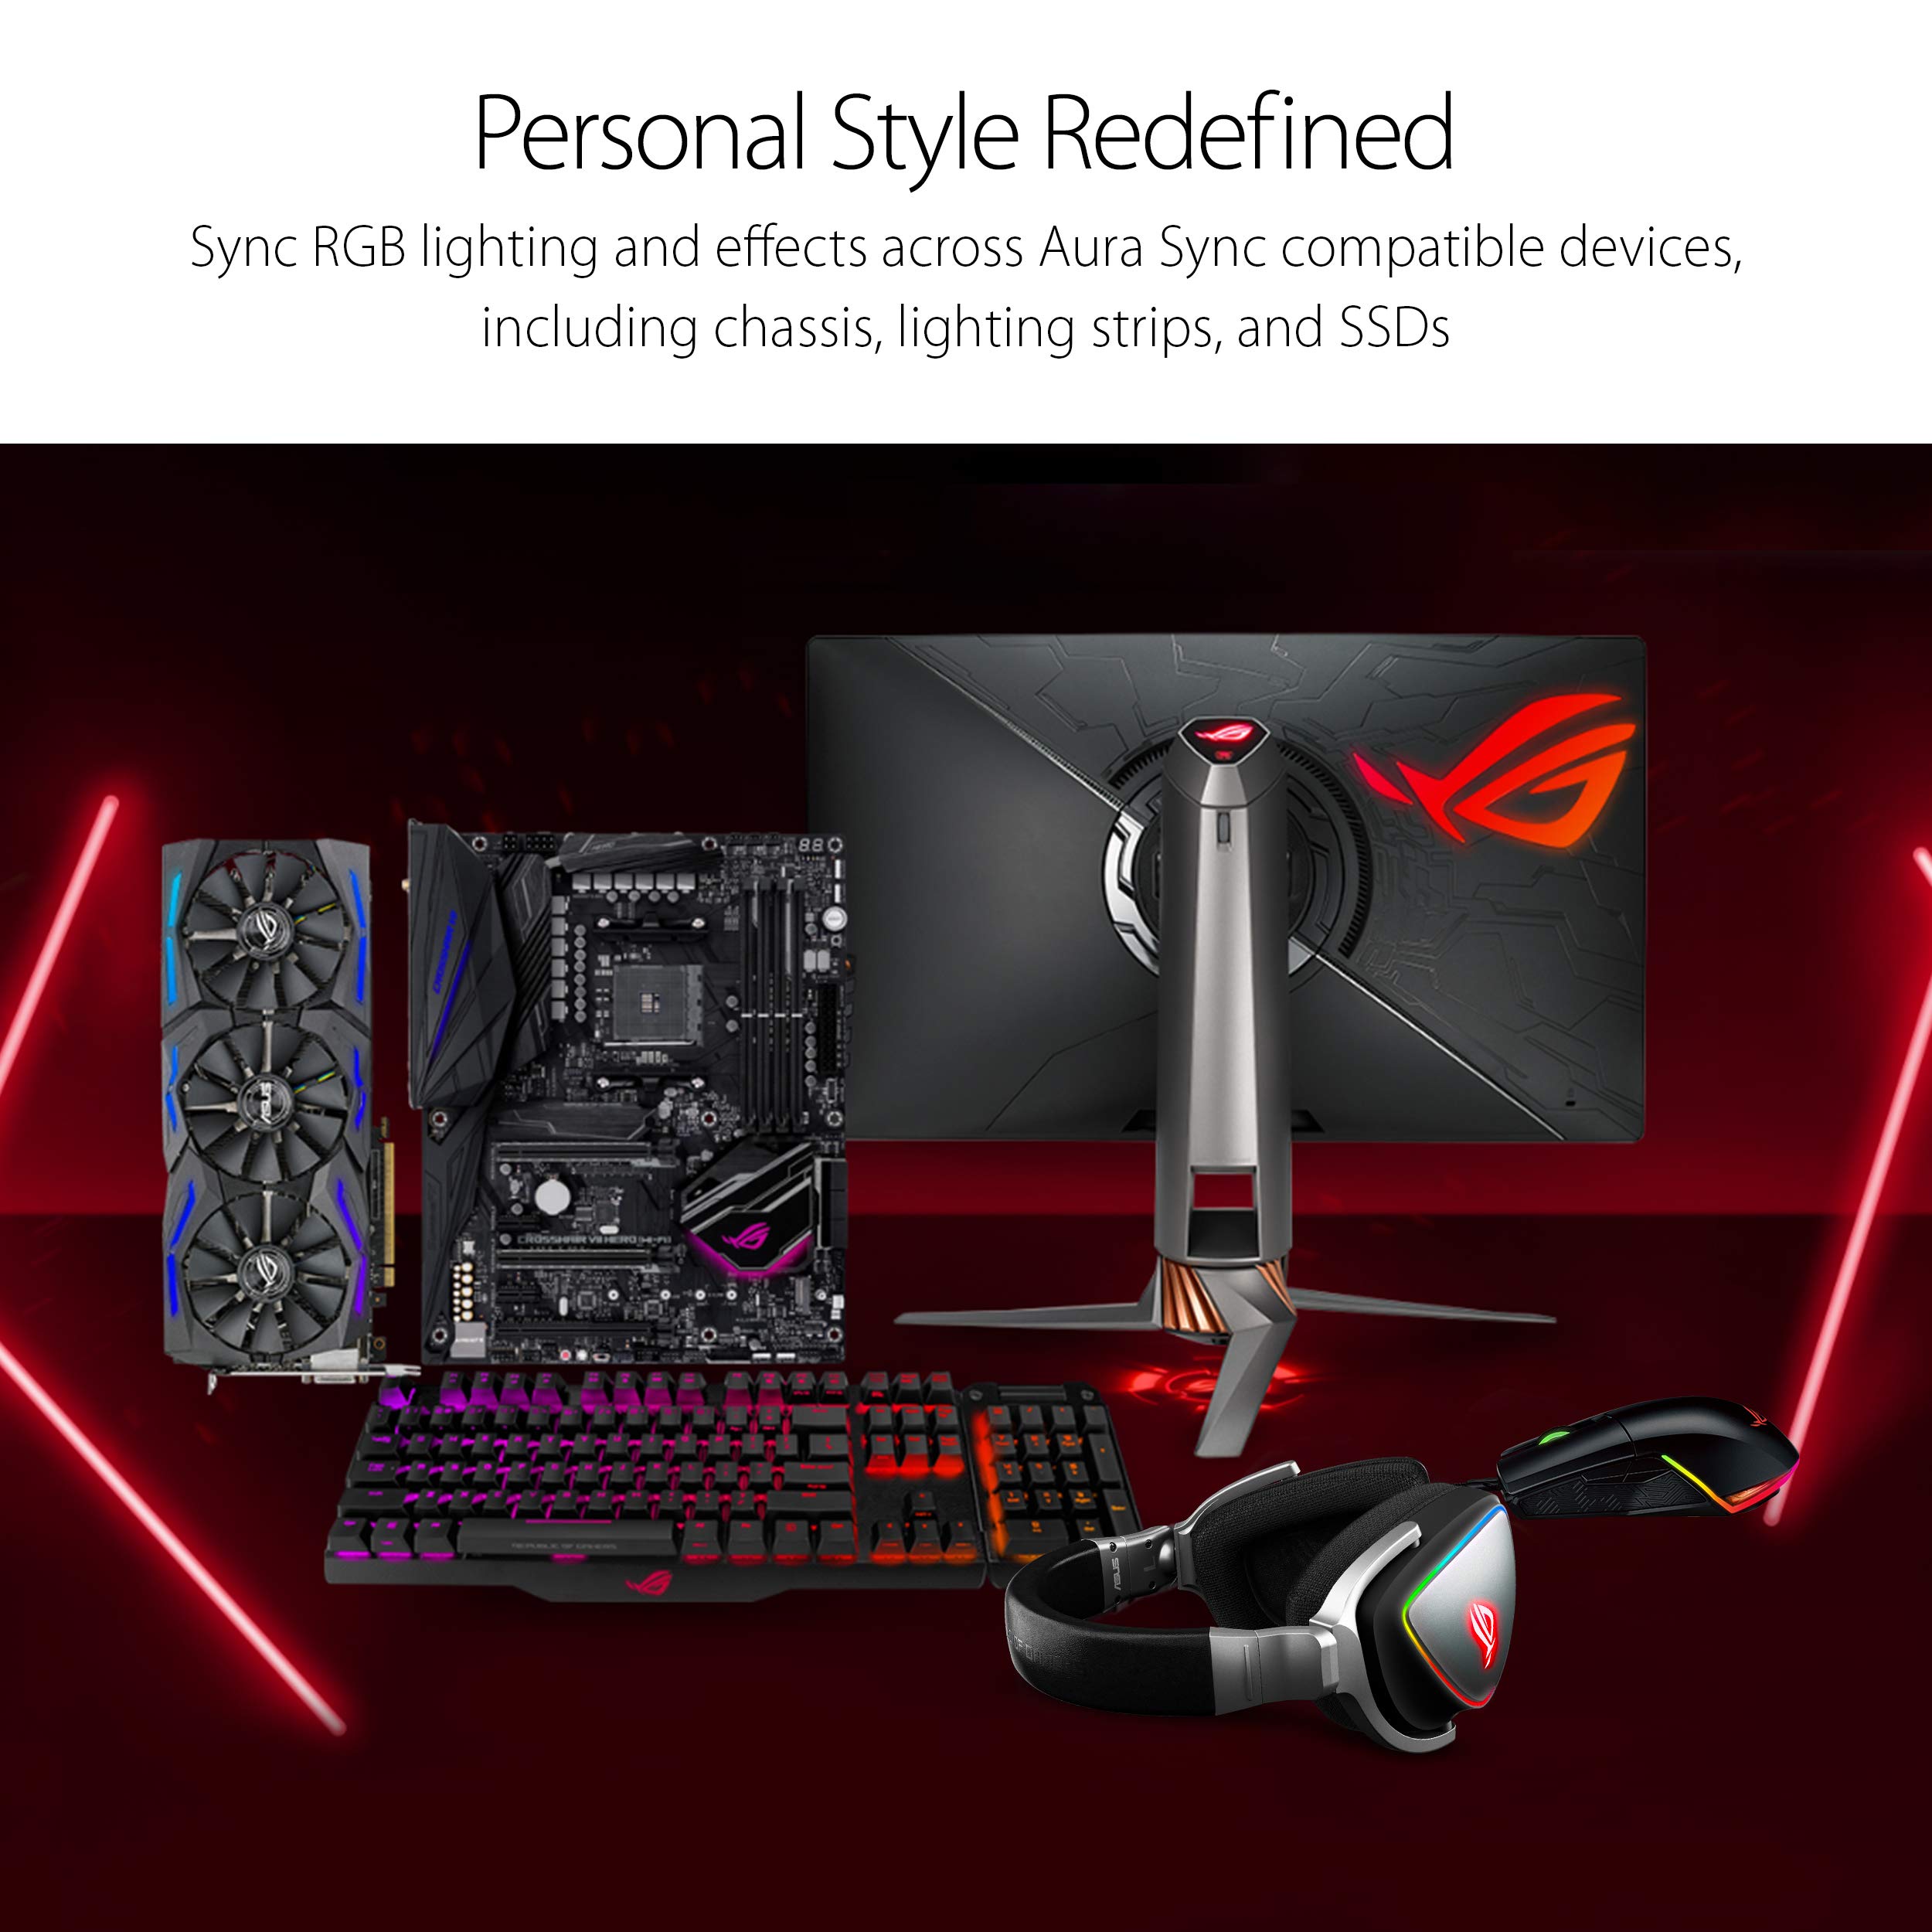 ASUS Gaming Headset ROG DELTA | Headset with Mic and Hi-Res ESS Quad-DAC | Compatible Gaming Headphones for PC, Mac, PS4, Xbox One | Aura Sync RGB Lighting